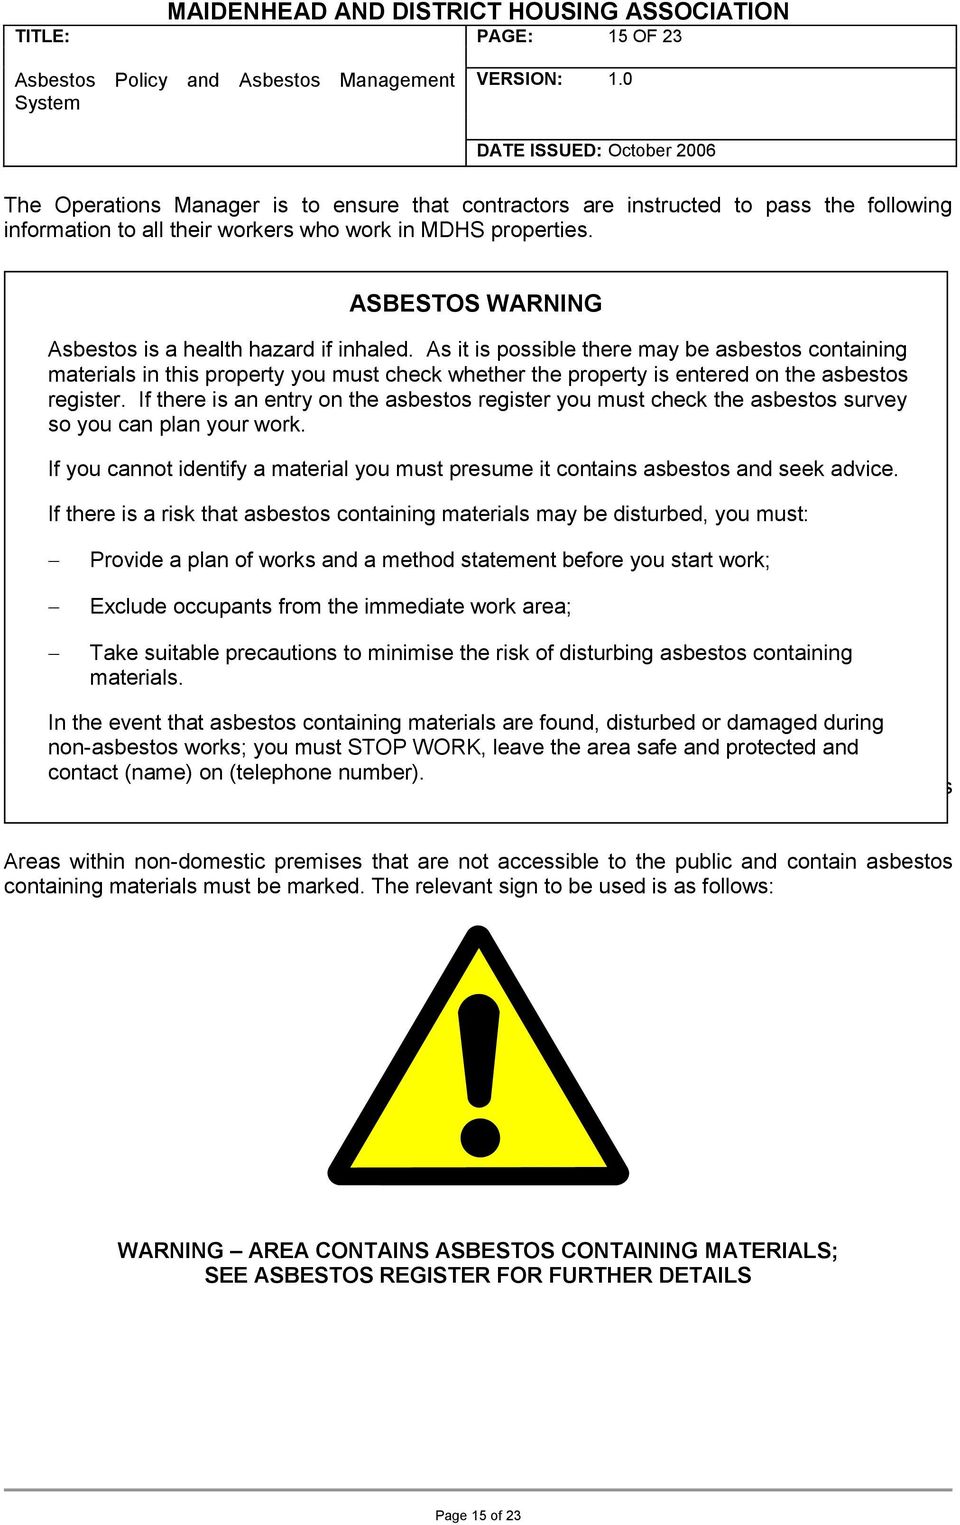 As it is possible there may be asbestos containing materials in this property you must check whether the property is entered on the asbestos register.